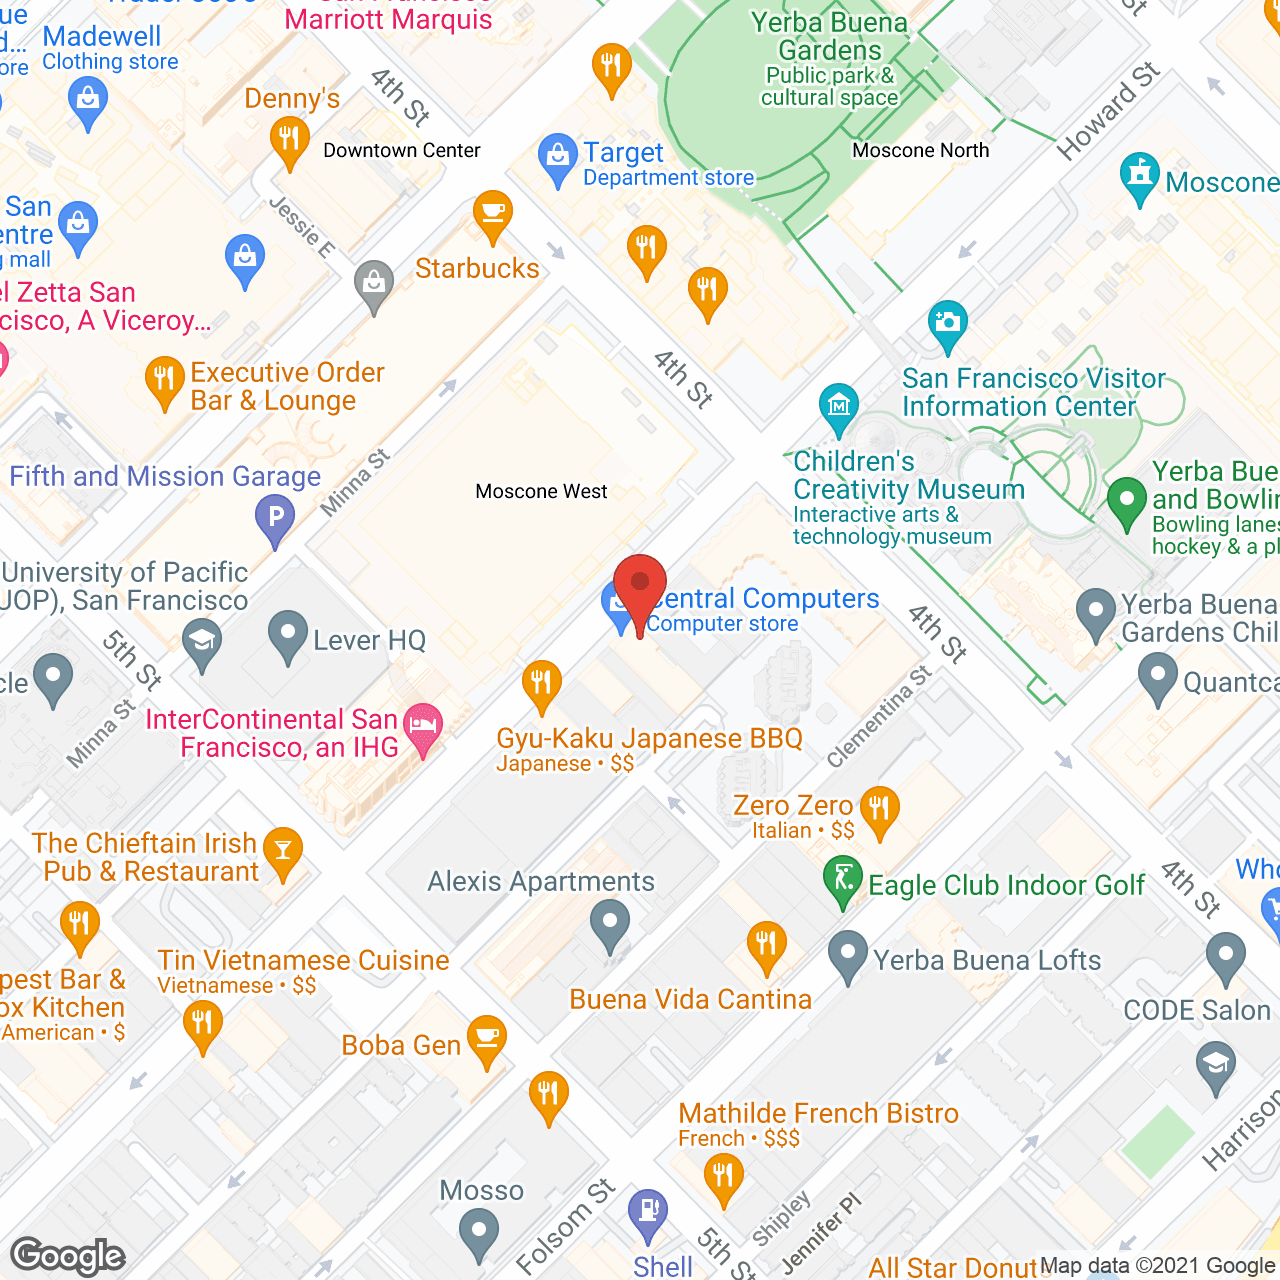 Honor Home Care - San Mateo, CA in google map